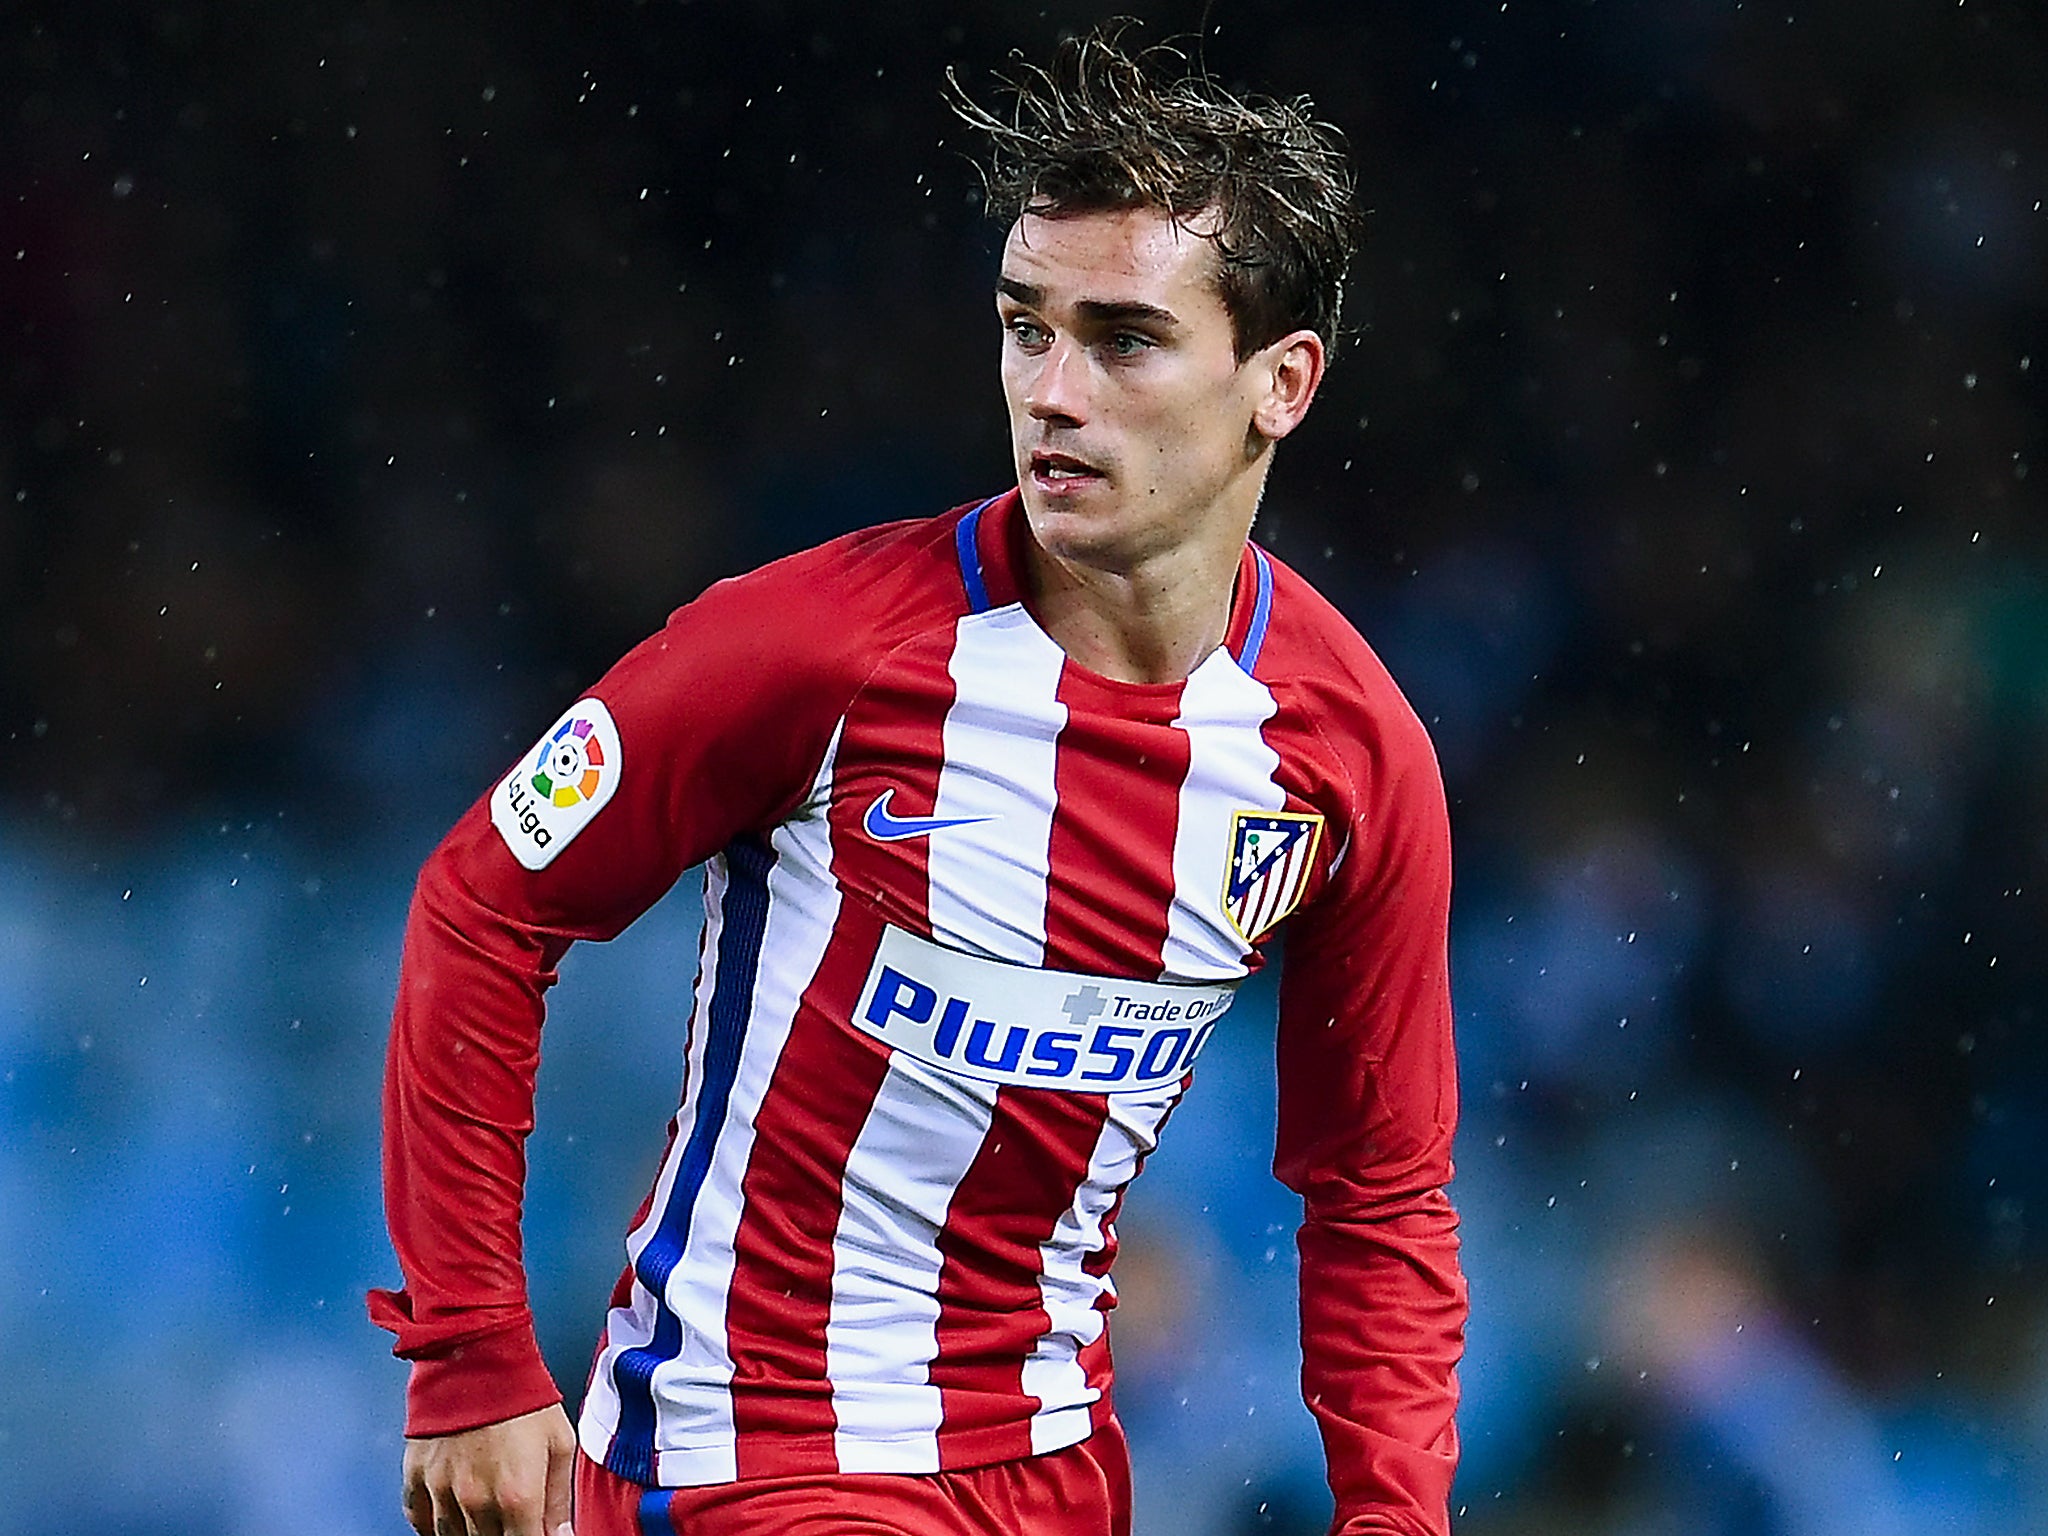 Griezmann has a contract until 2021 with Atletico